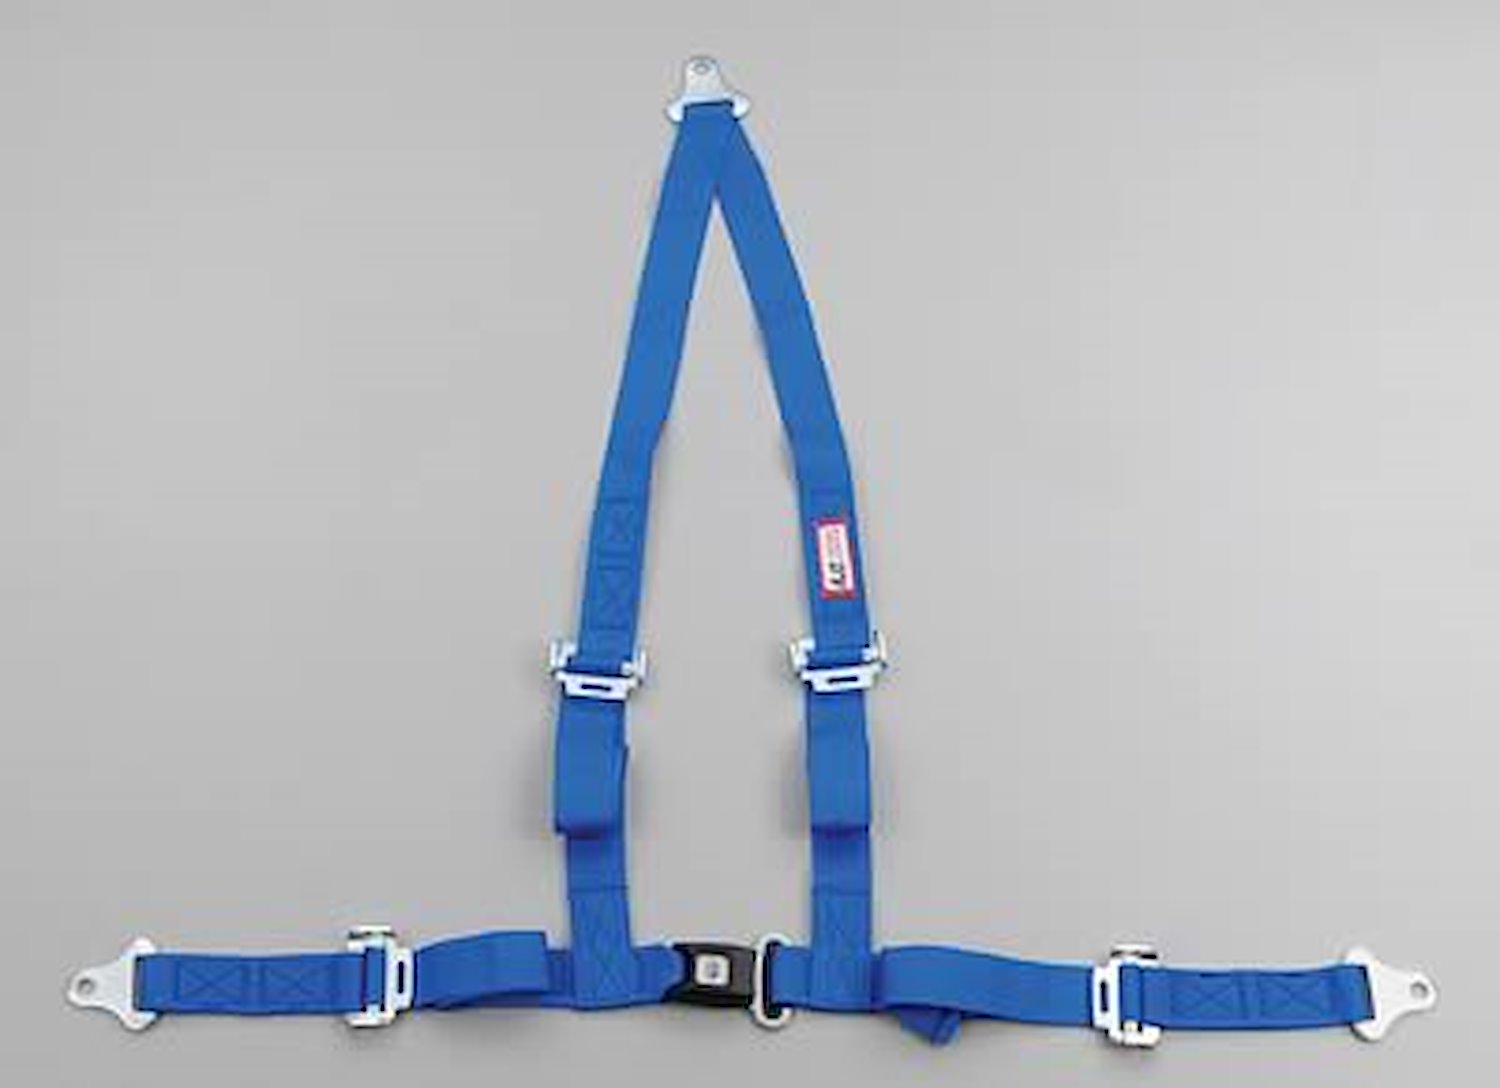 NON-SFI B&T HARNESS 2 PULL UP Lap Belt SNAP 2 S. H. Individual FLOOR Mount WRAP/BOLT w/STERNUM STRAP BLUE